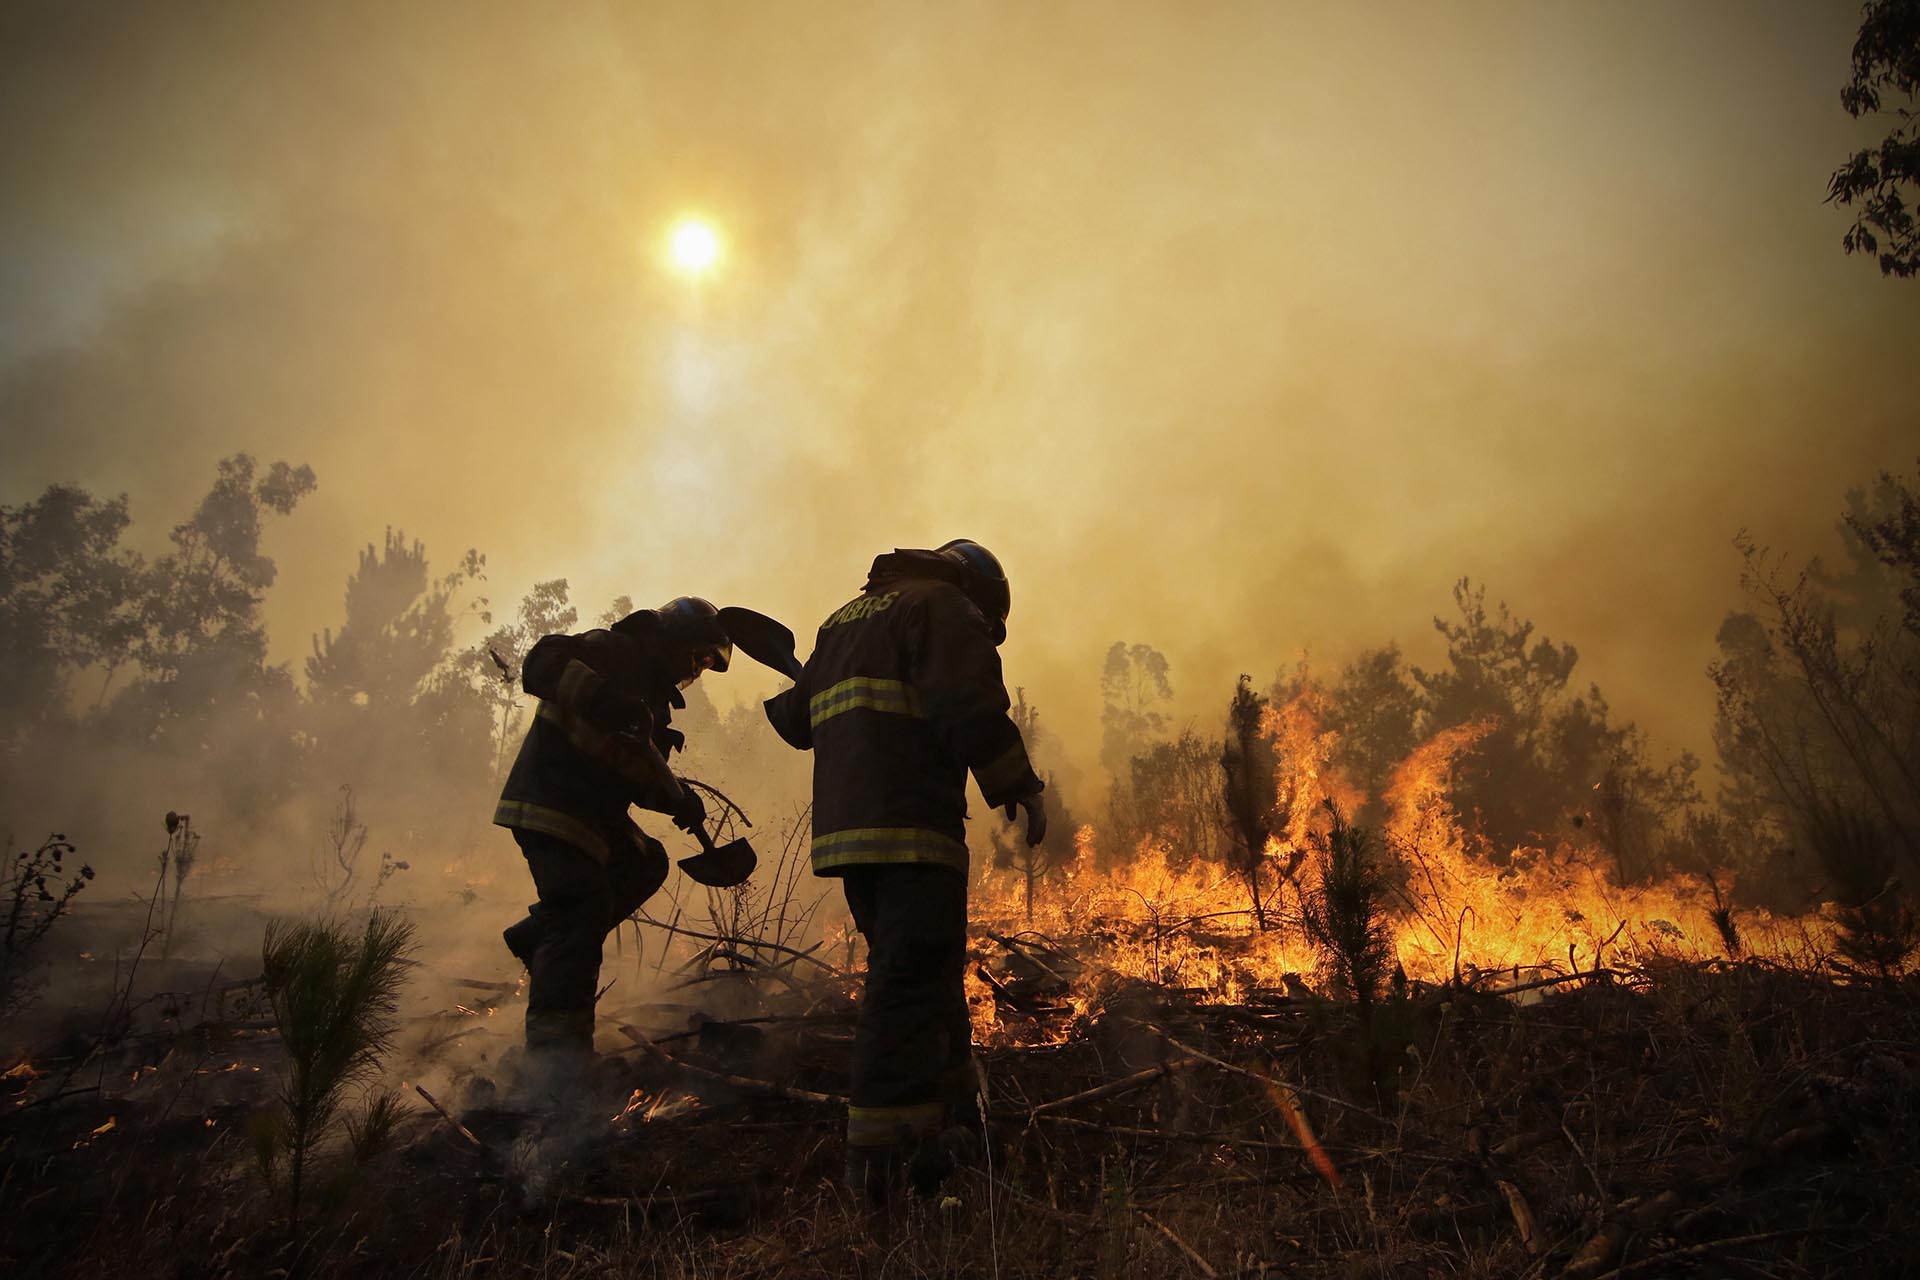 Firefighters dig trenches in a effort to stop the advancement of a forest fire in Hualañe, a community in Concepcion, Chile, Wednesday, Jan. 25, 2017. The worst forest fires in Chile's history were uncontrolled on Wednesday, killing a firefighter and two policemen caught in the flames as they tried to help families in rural communities, authorities said. (Alejandro Zoñez/Aton via AP) NO PUBLICAR EN CHILE